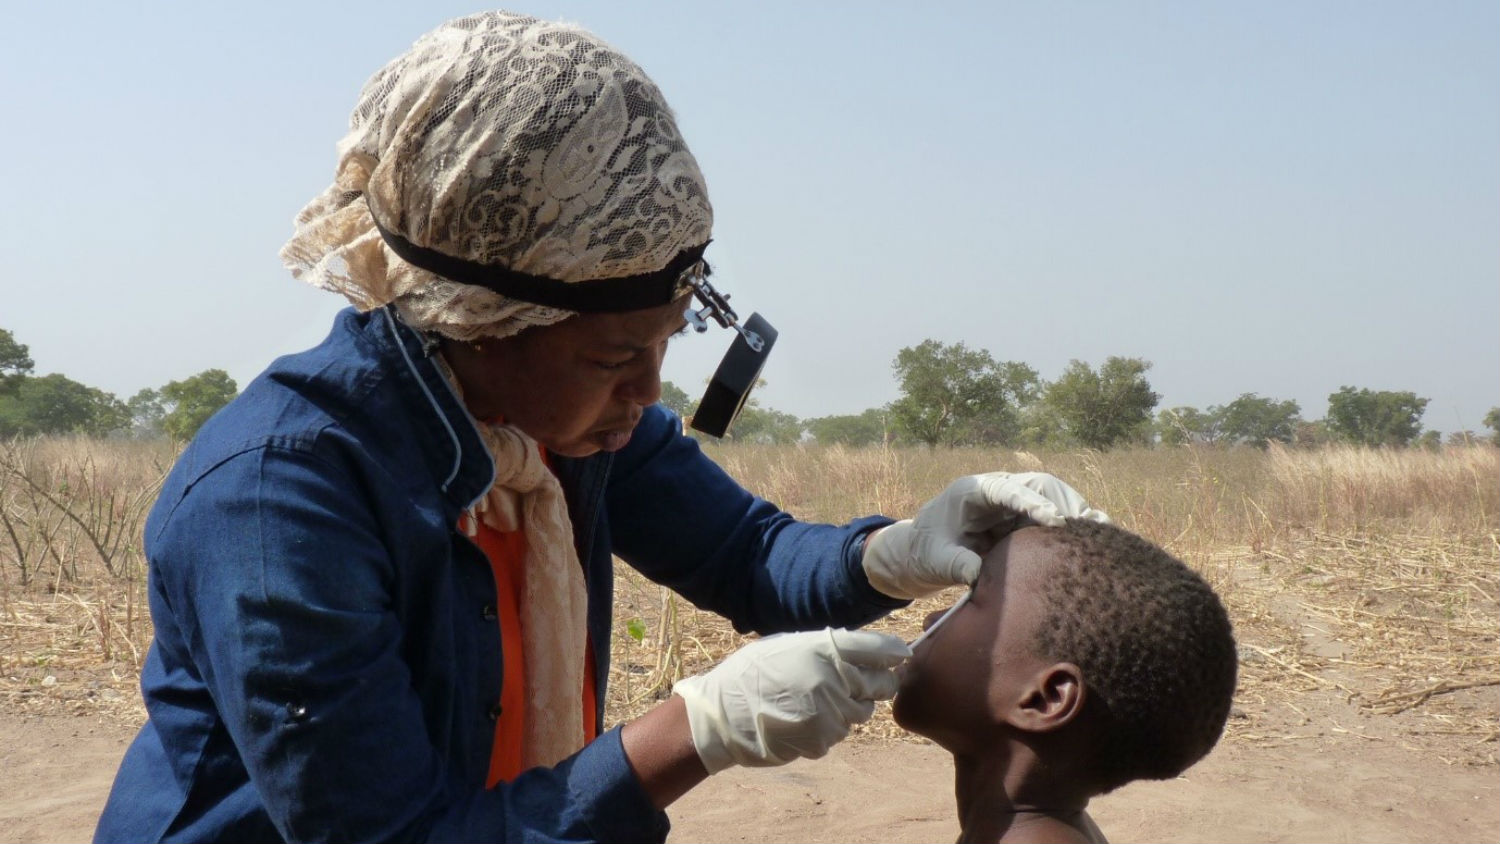 A health worker examines the eyes of a young child outside.